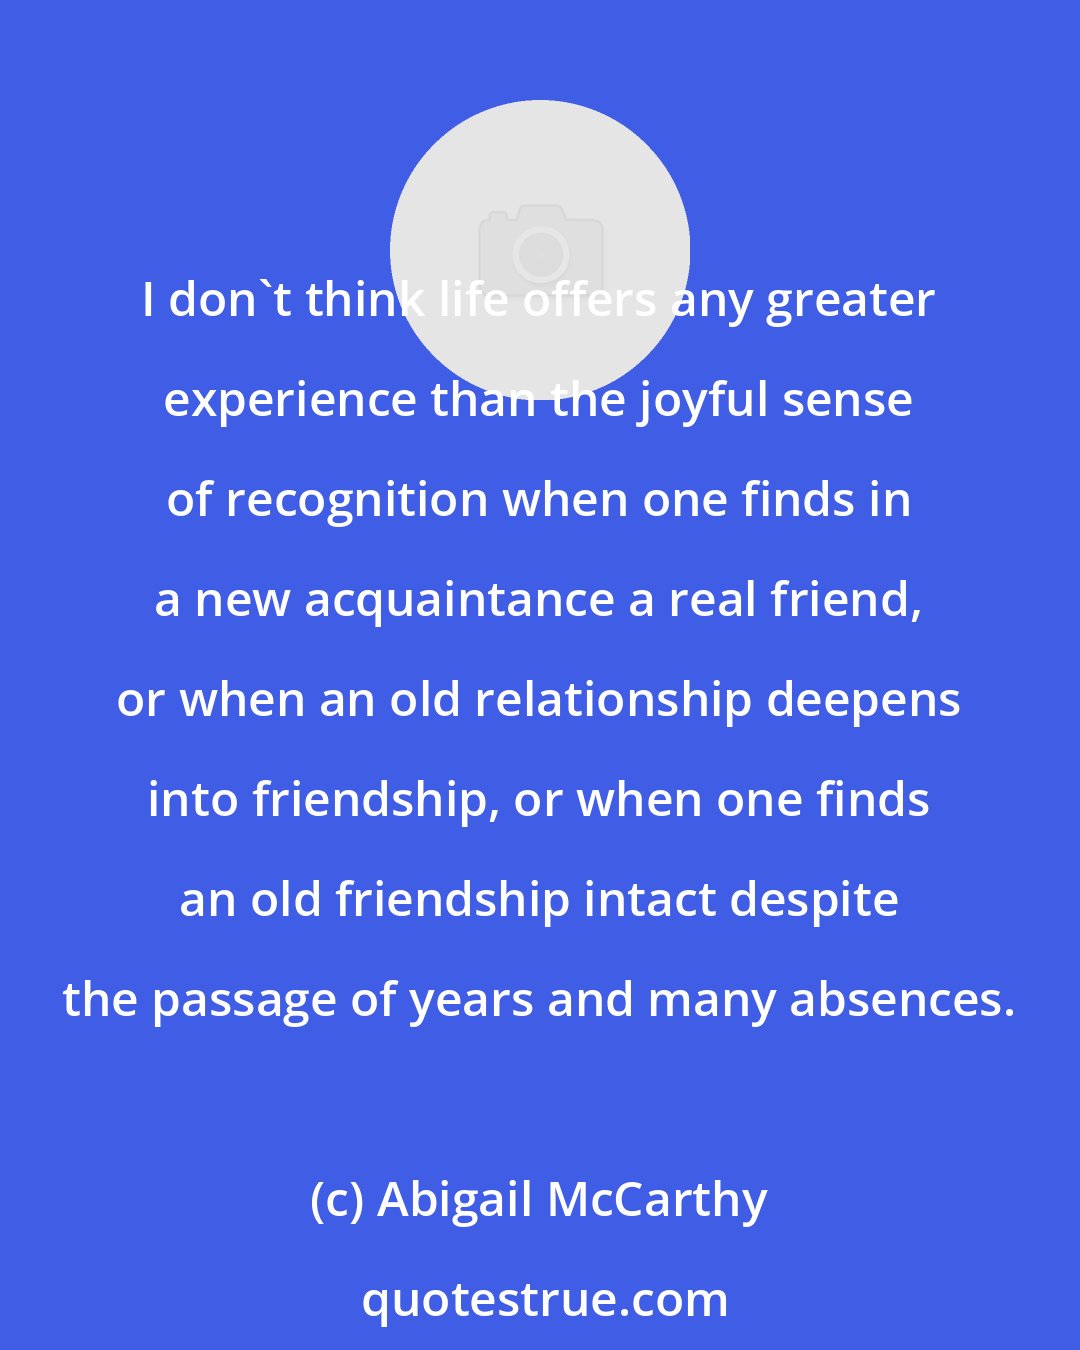 Abigail McCarthy: I don't think life offers any greater experience than the joyful sense of recognition when one finds in a new acquaintance a real friend, or when an old relationship deepens into friendship, or when one finds an old friendship intact despite the passage of years and many absences.